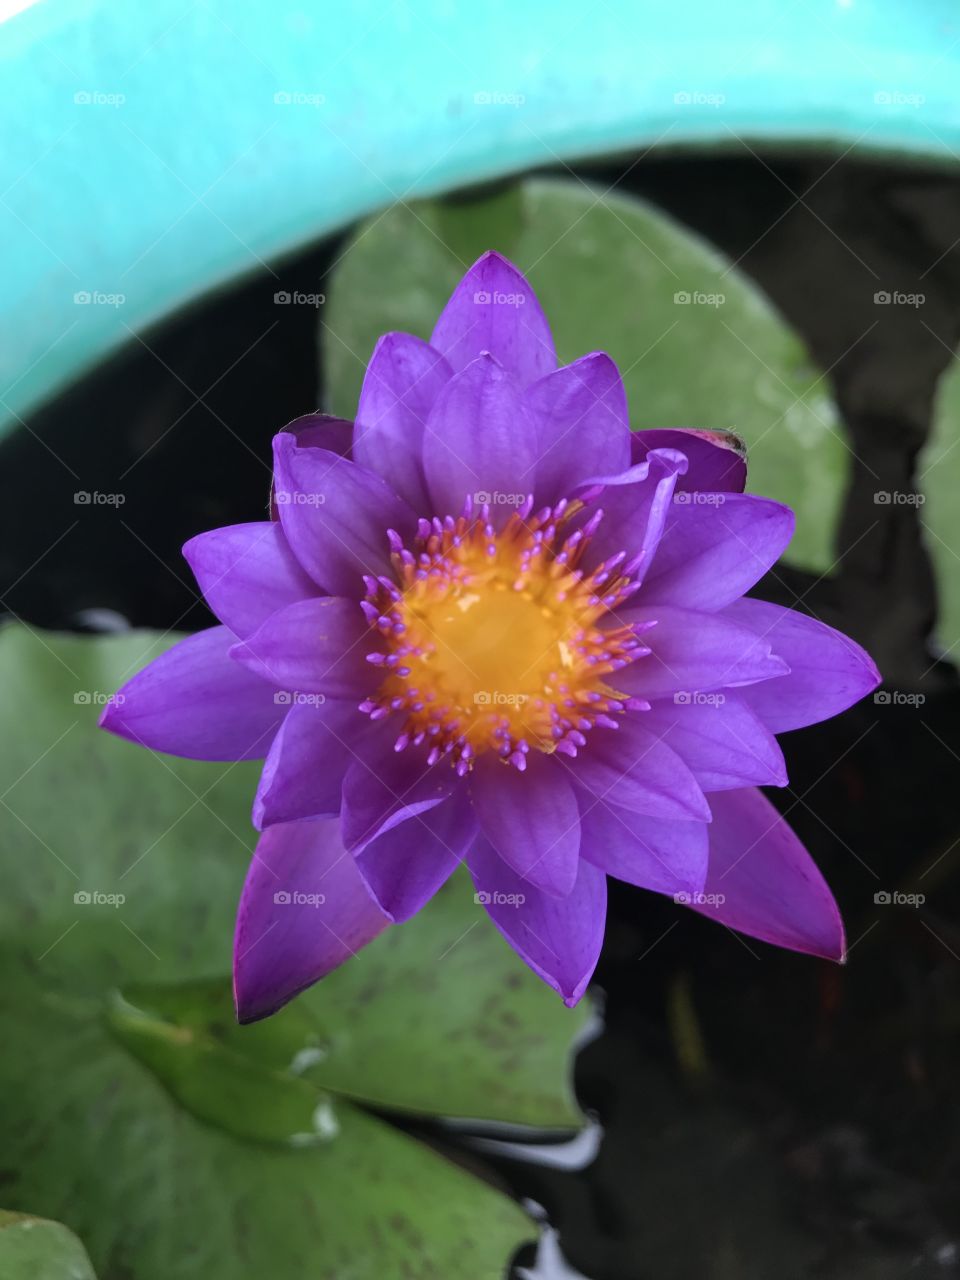 Nymphaea sp. and hybrid